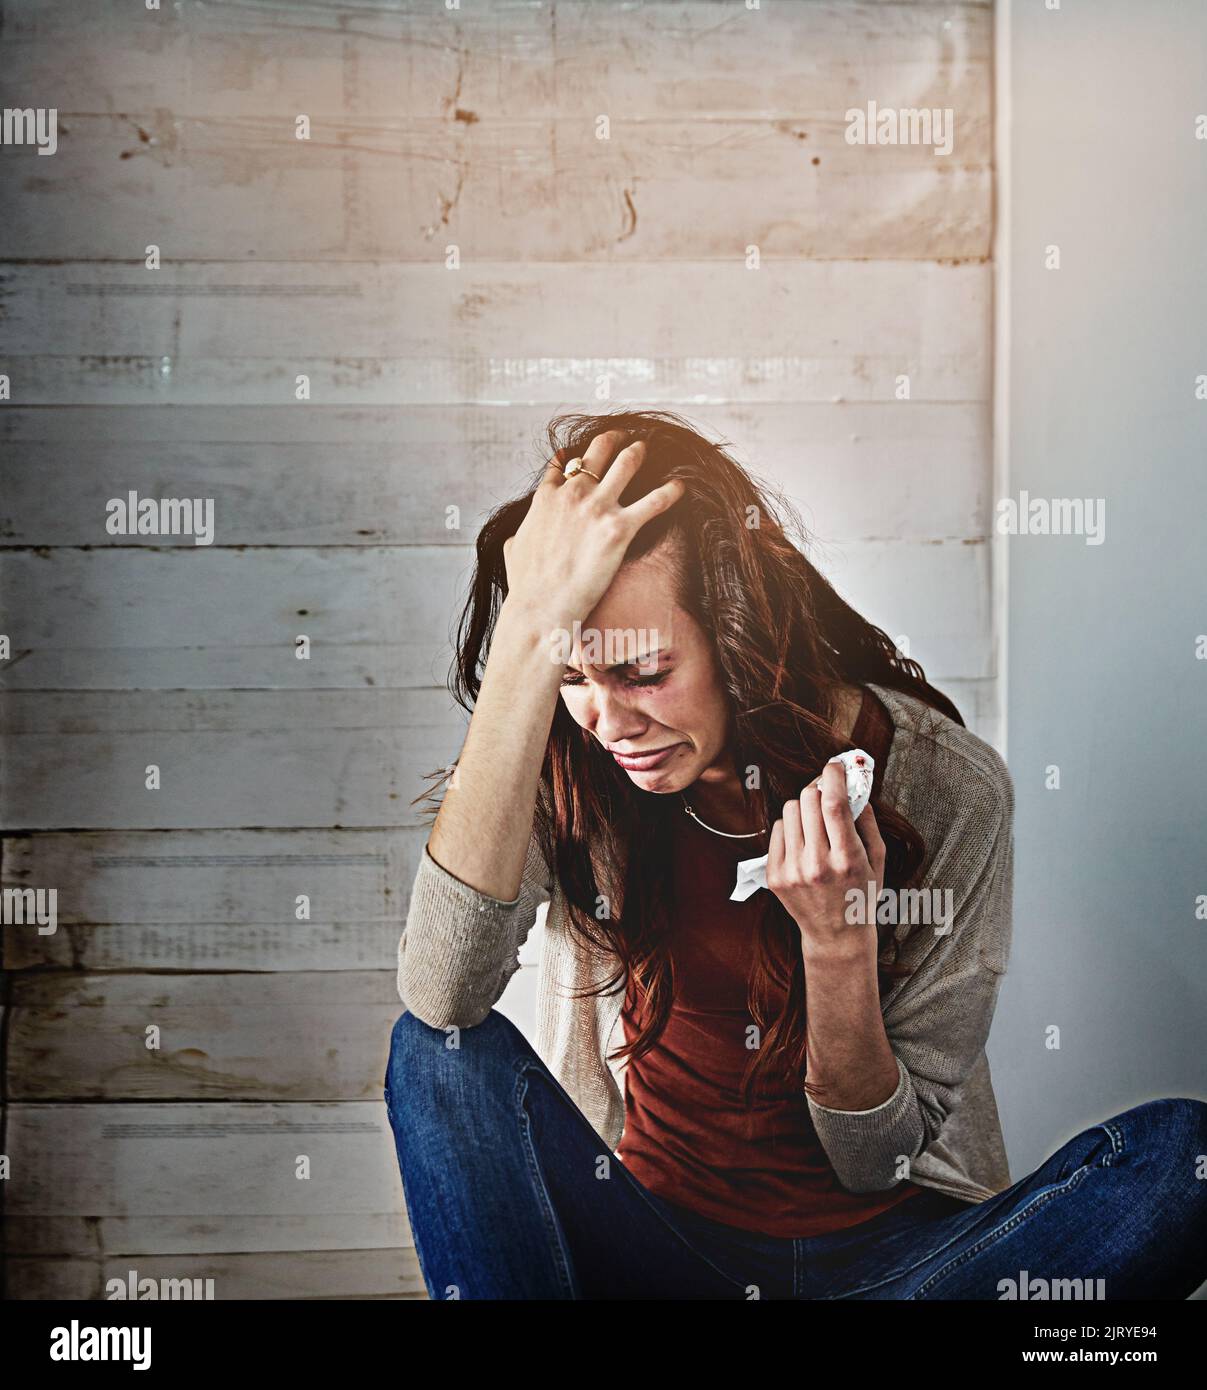 She feels helpless. a beaten and bruised young woman crying. Stock Photo